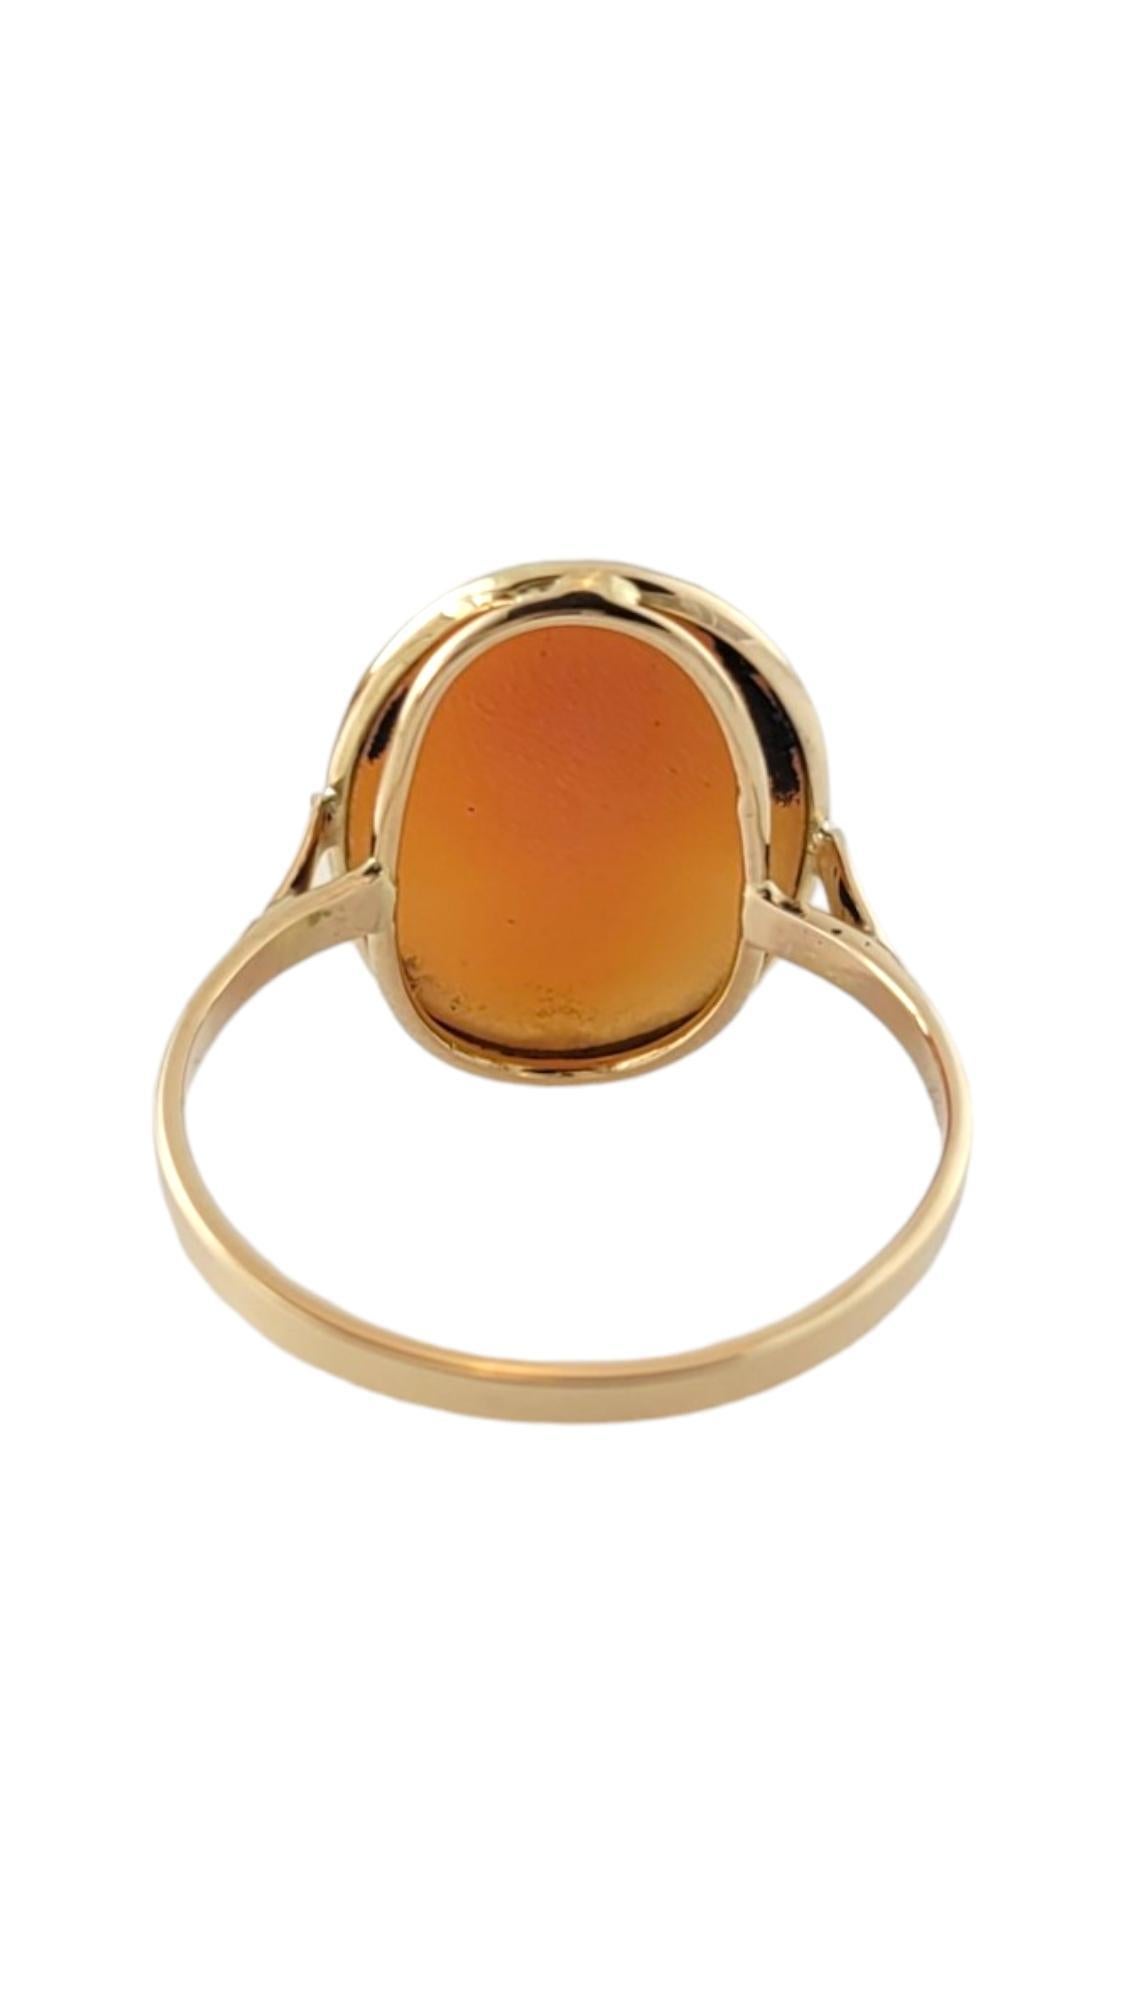 Women's Vintage 14K Yellow Gold Cameo Ring Size 7.25 #16931 For Sale